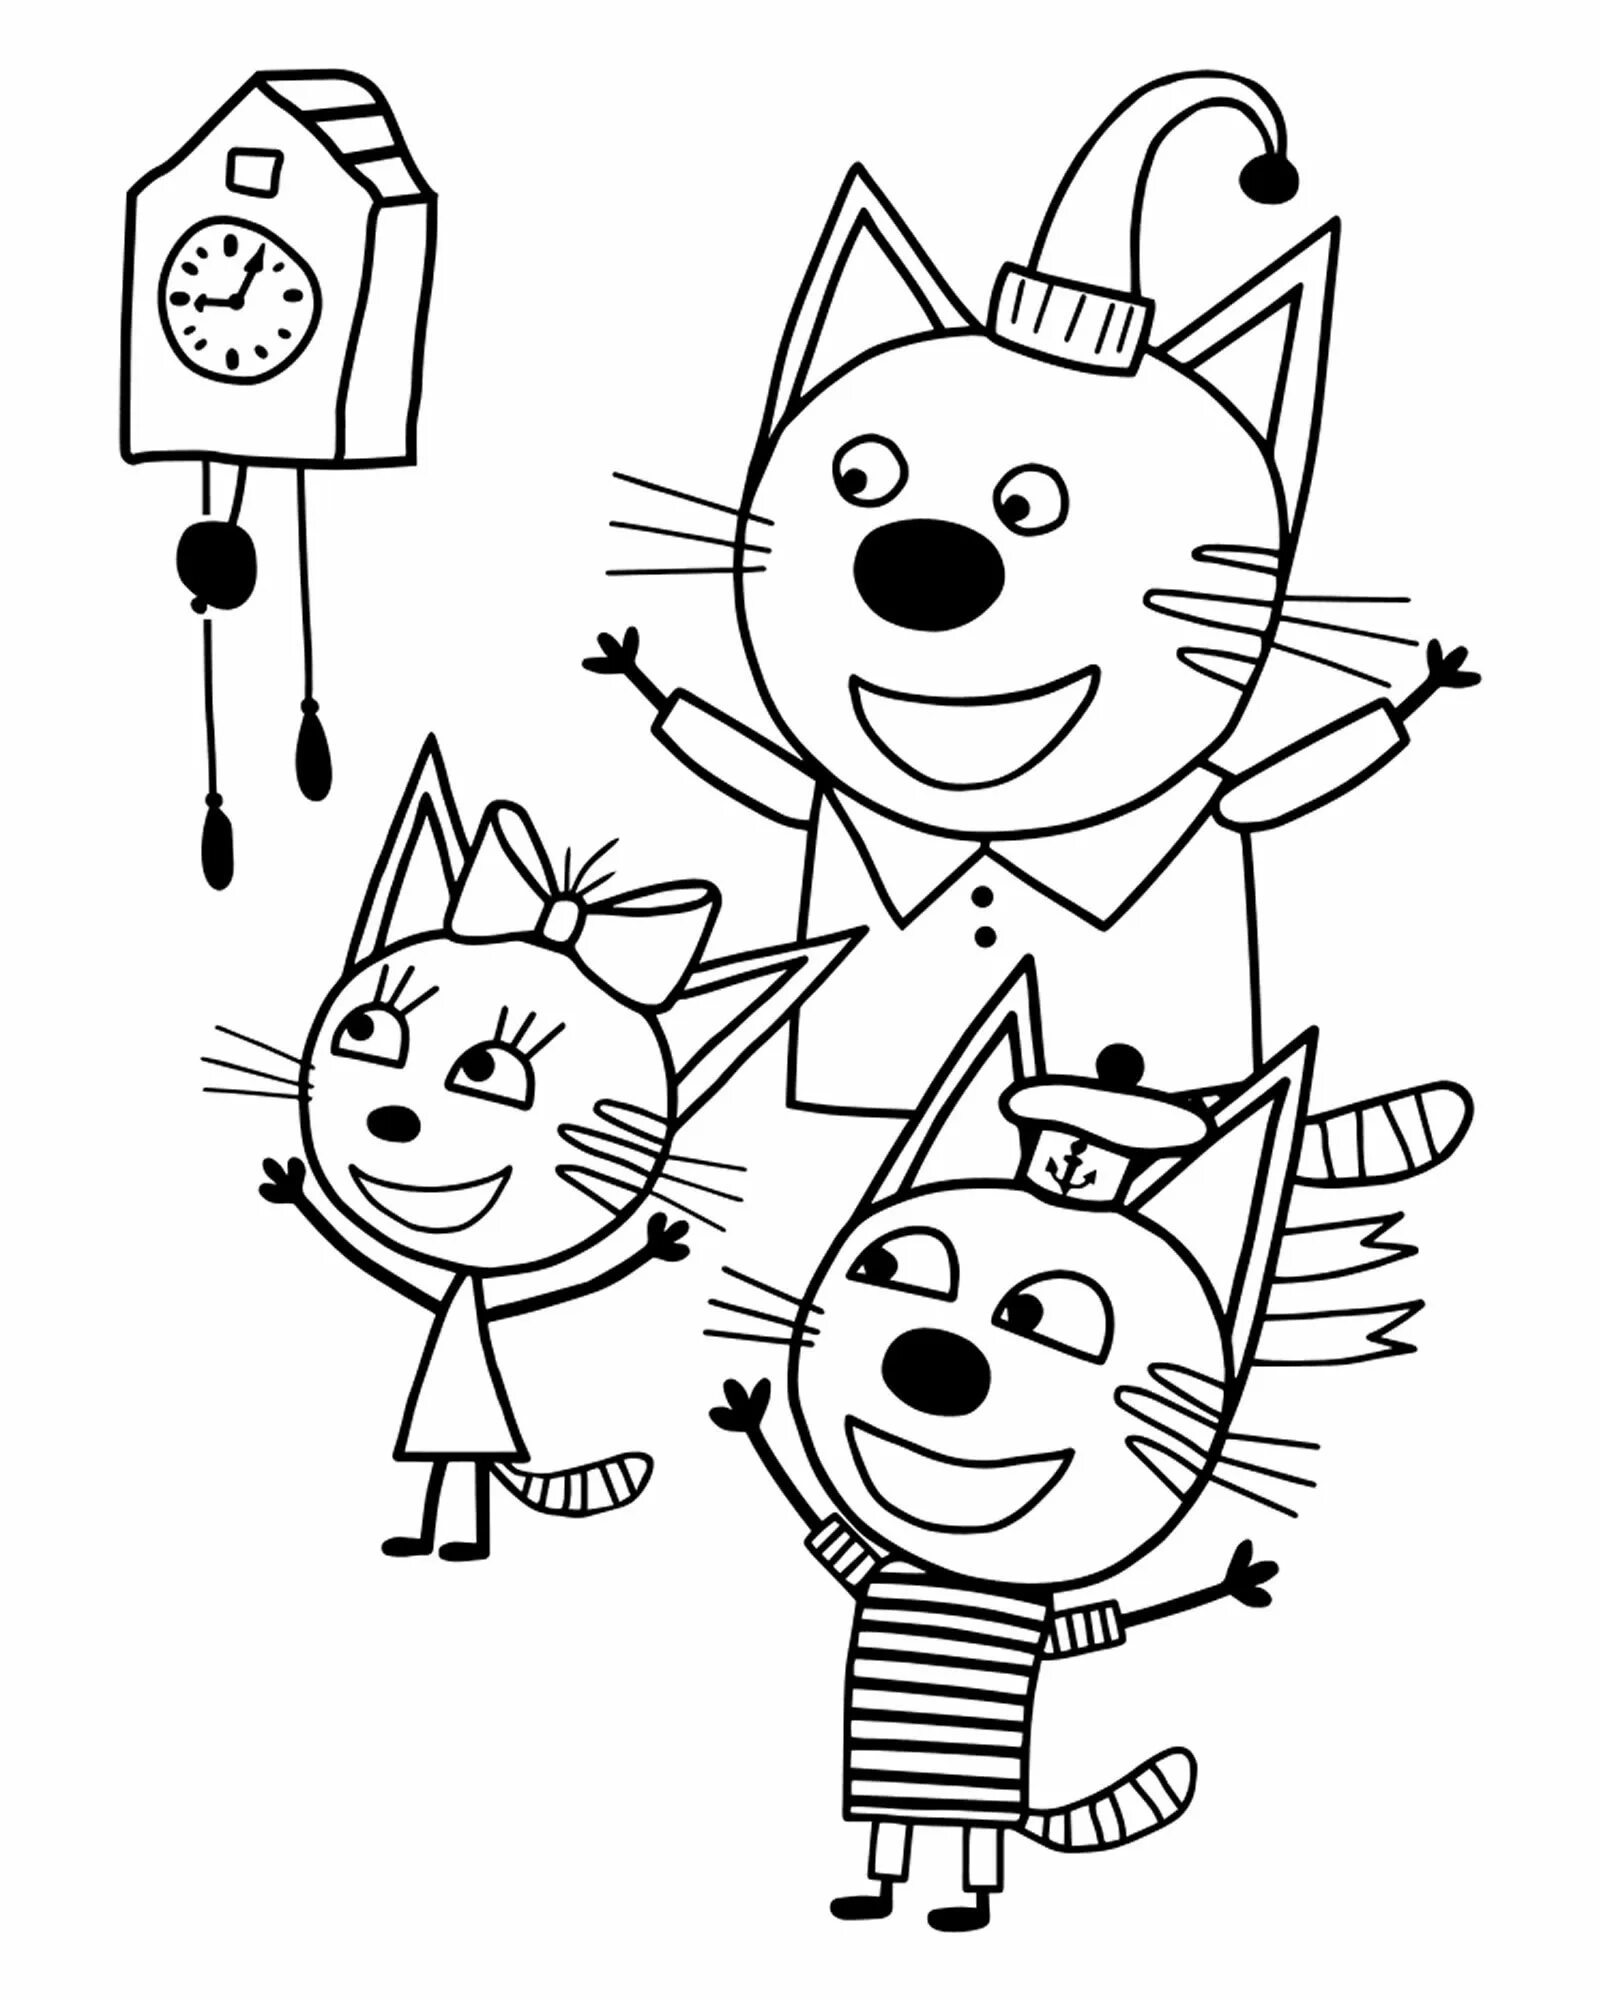 Charming 3 cats coloring book for kids